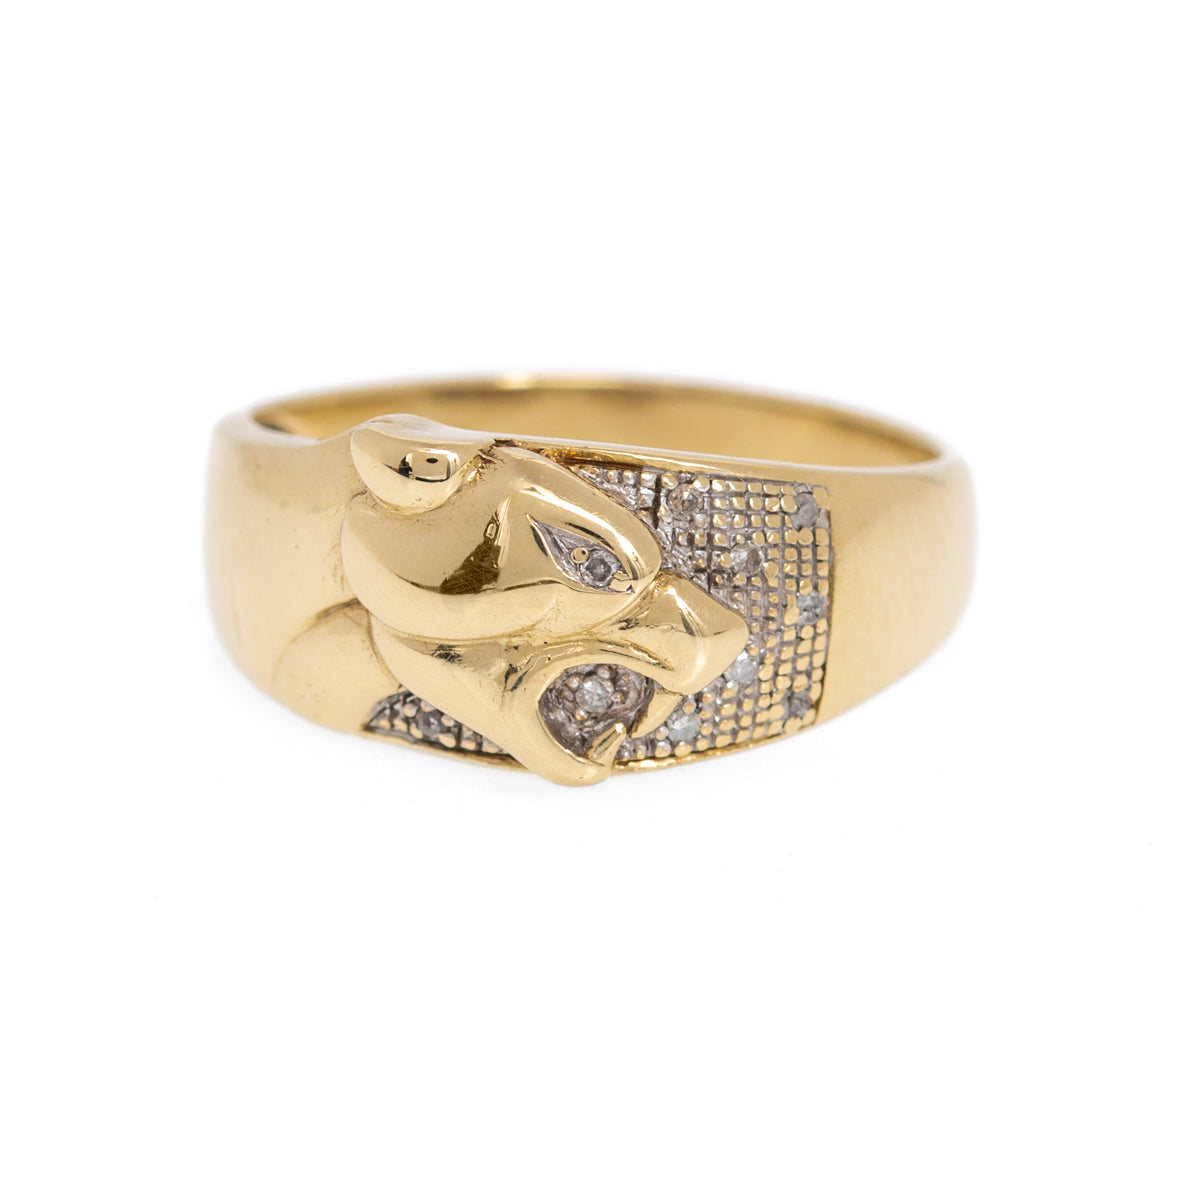 Stunning 9ct Gold Ring With Panther Head & Diamonds Birmingham Hallmark Size T (Code A1027)